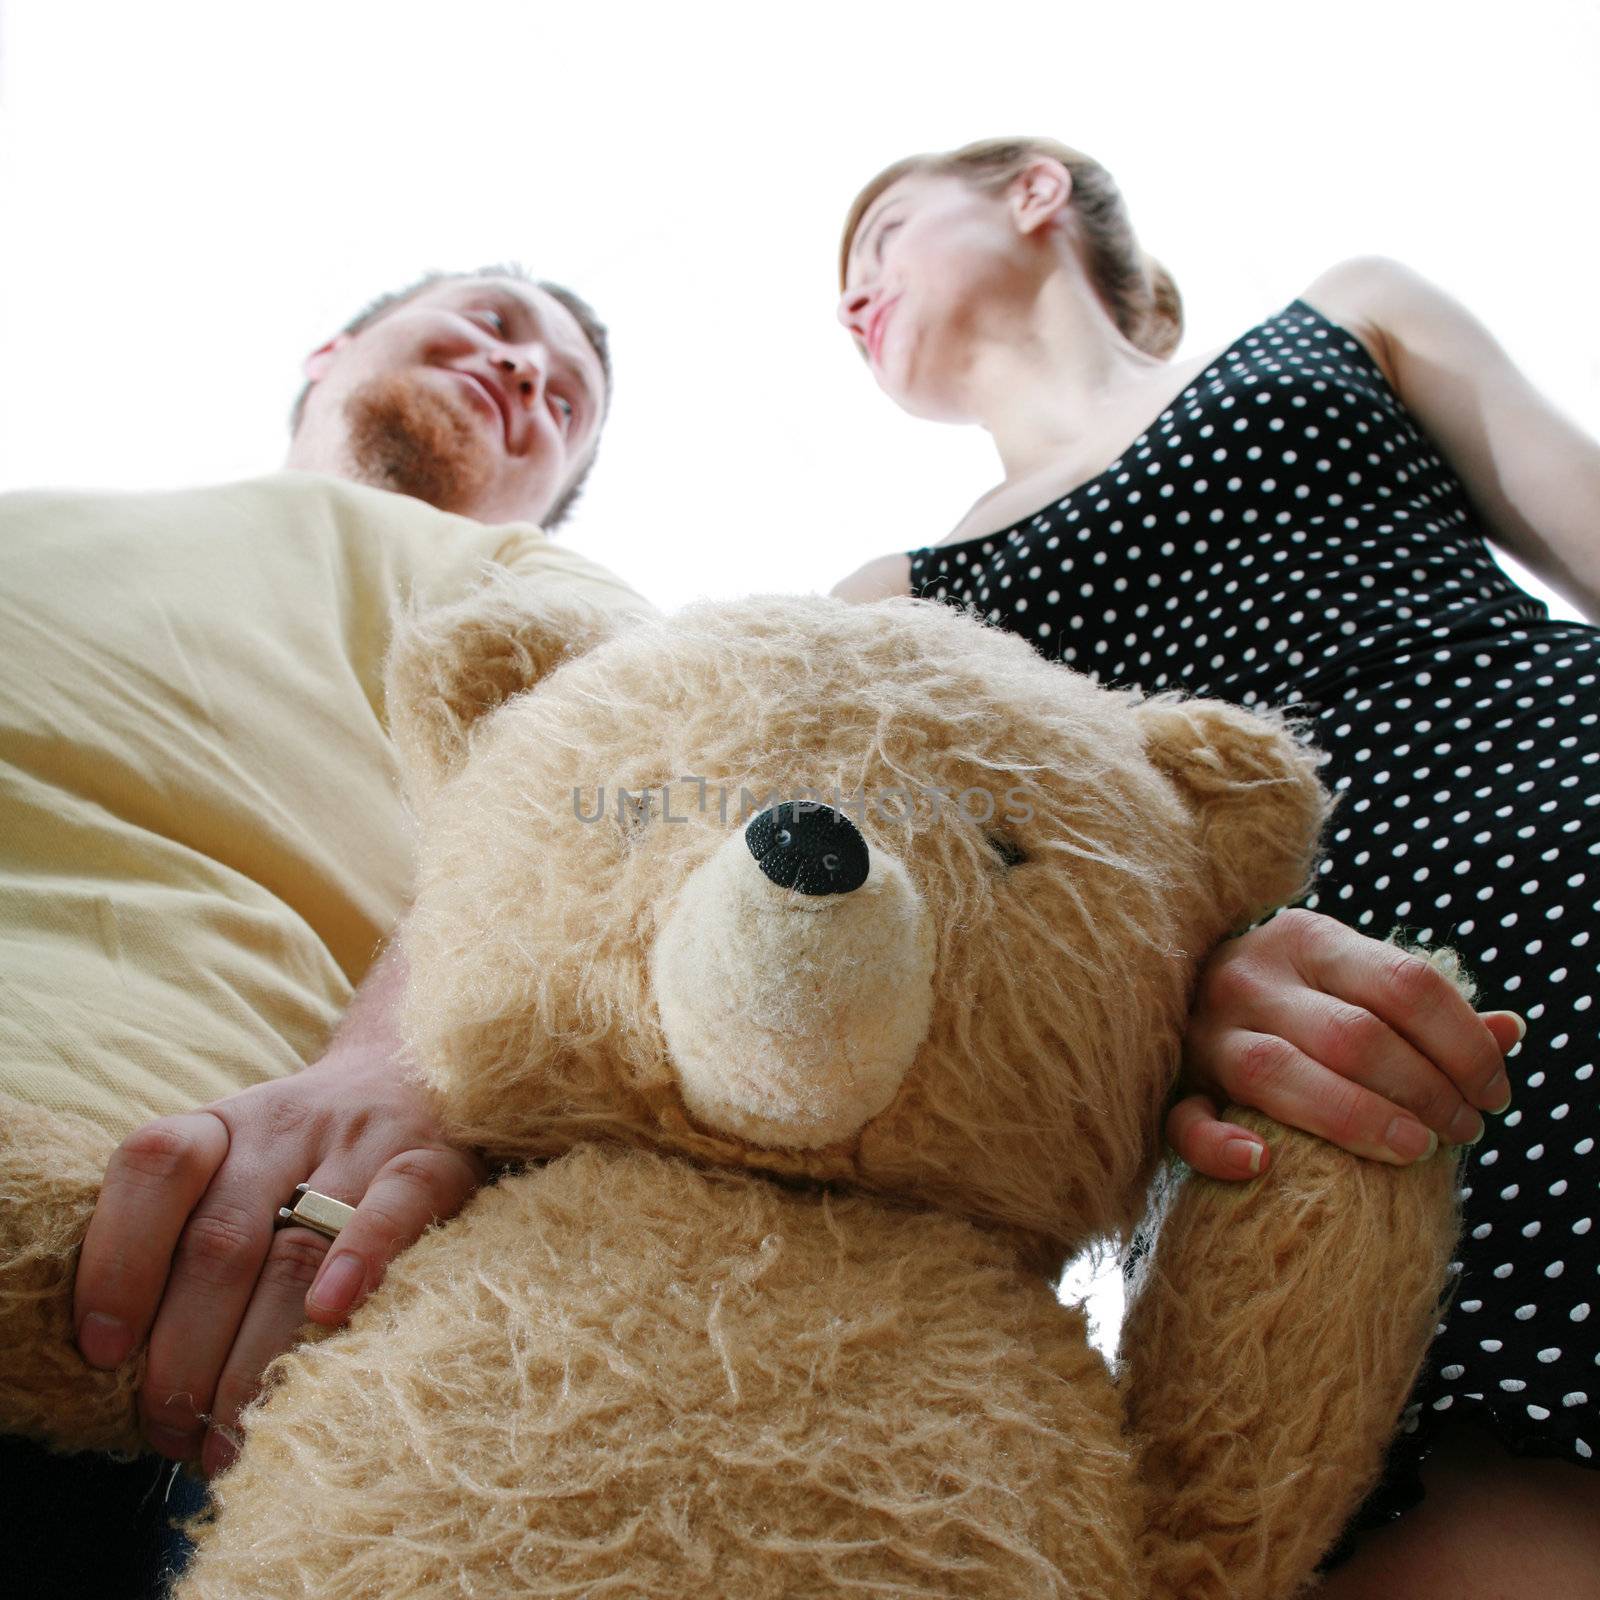 An image of a man and a woman with a teddy-bear